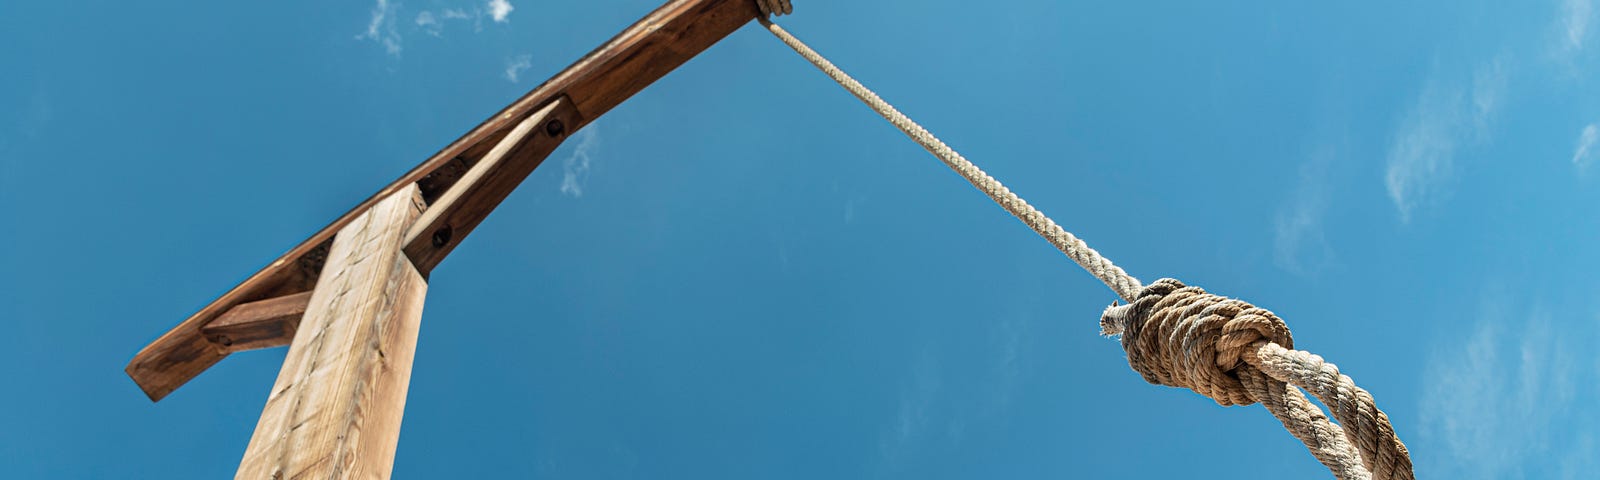 Bright blue sky with scaffold and noose in foreground.